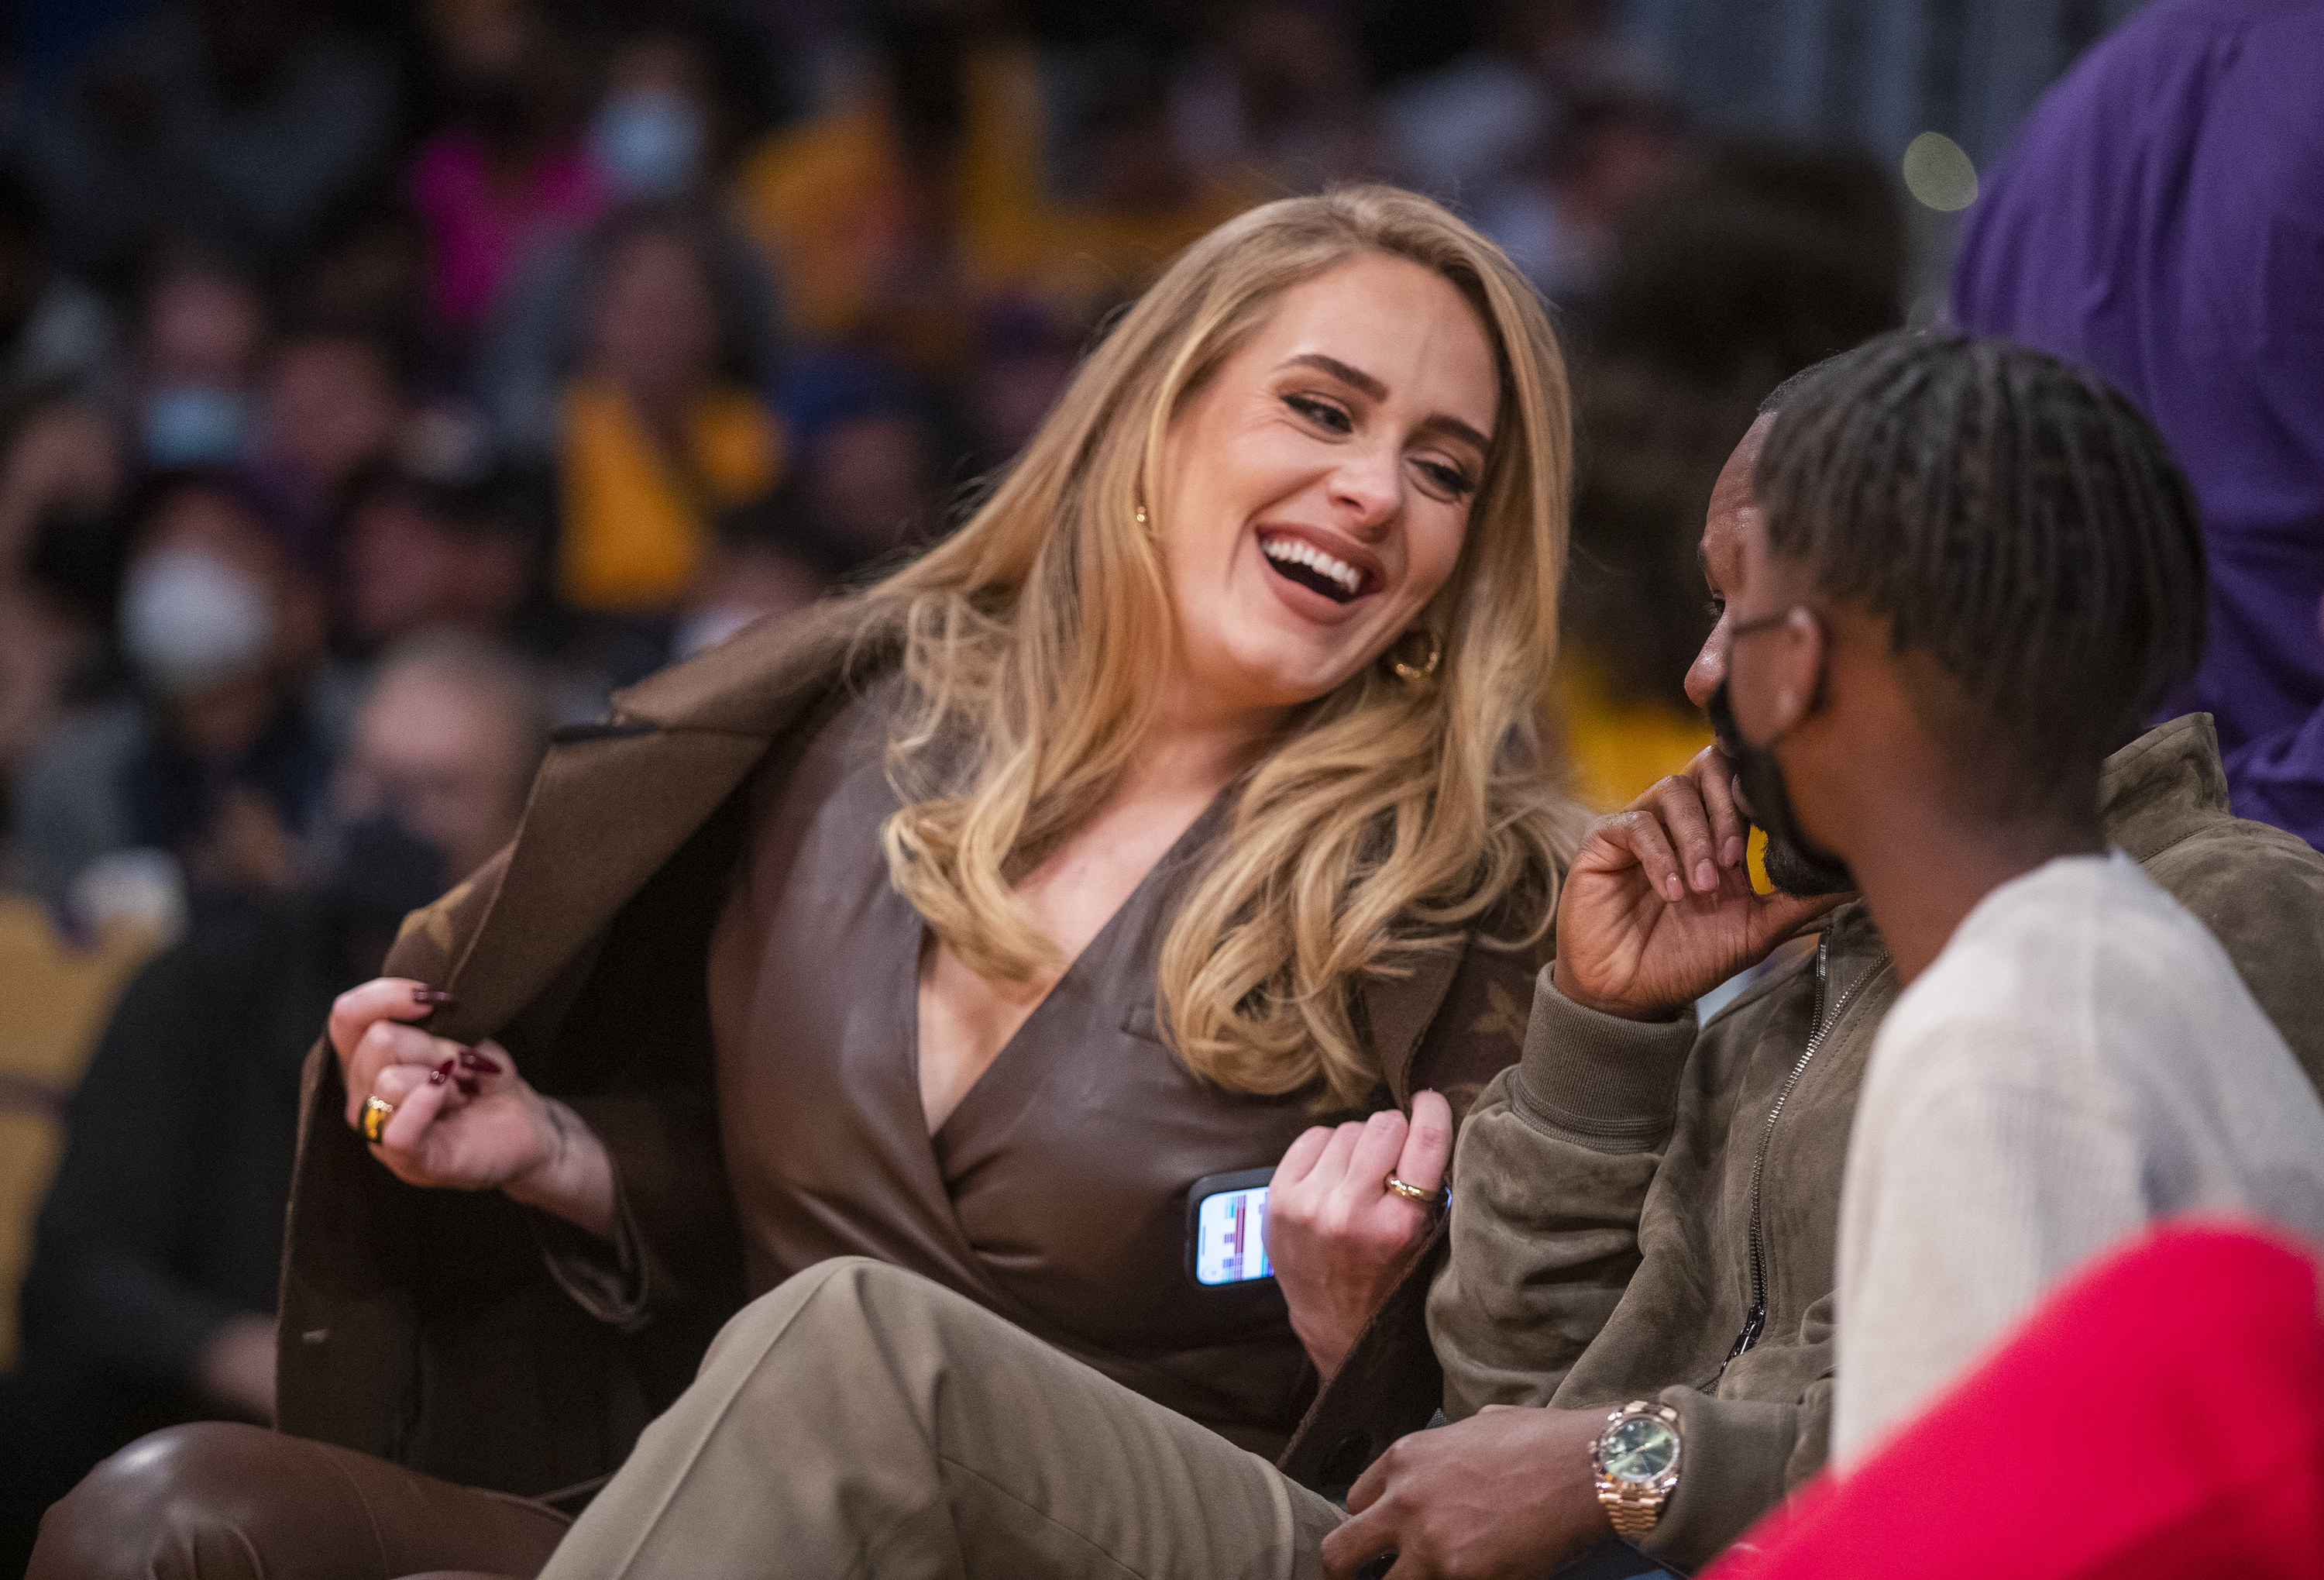 Adele laughing as talks to someone during an NBA basketball game